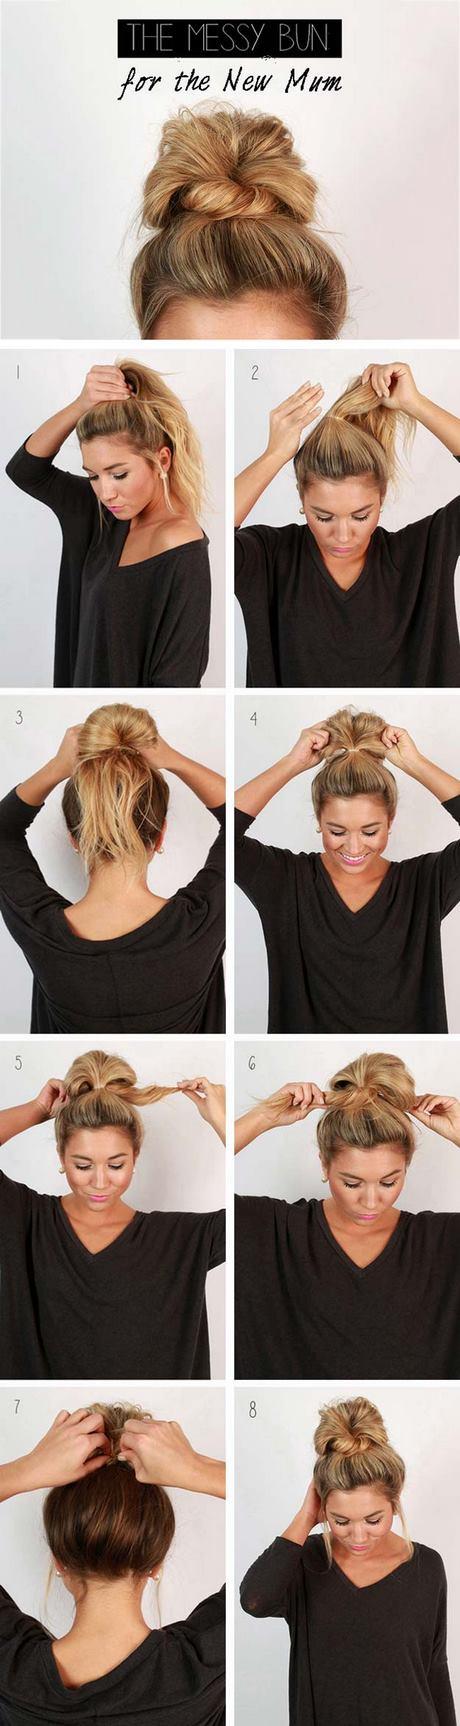 Quick and easy pretty hairstyles quick-and-easy-pretty-hairstyles-00_17